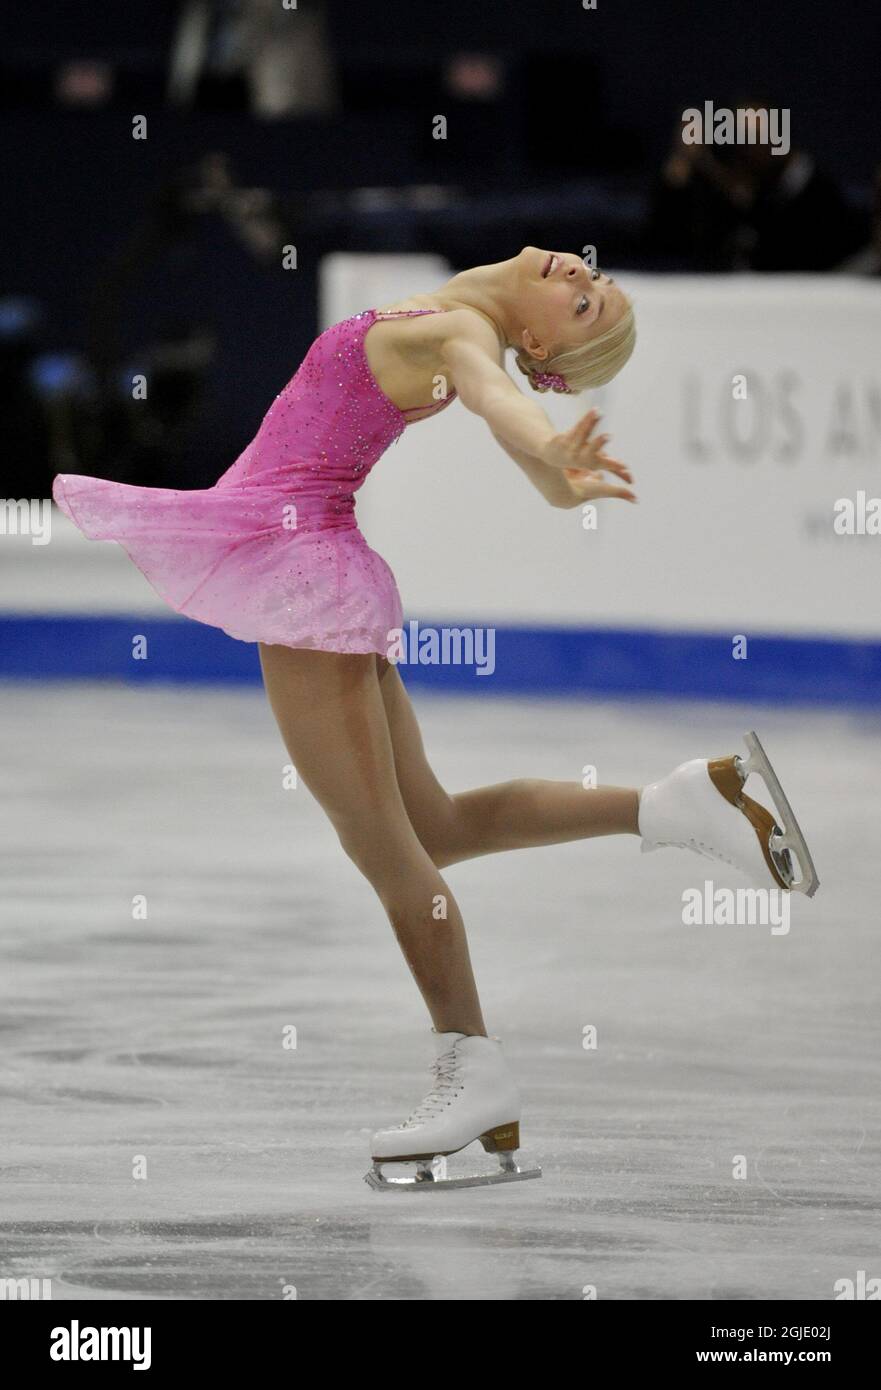 Finland's Kiira Korpi performs her ladies free skating routine of the World Figure Skating Championships in Gothenburg, Sweden, Stock Photo